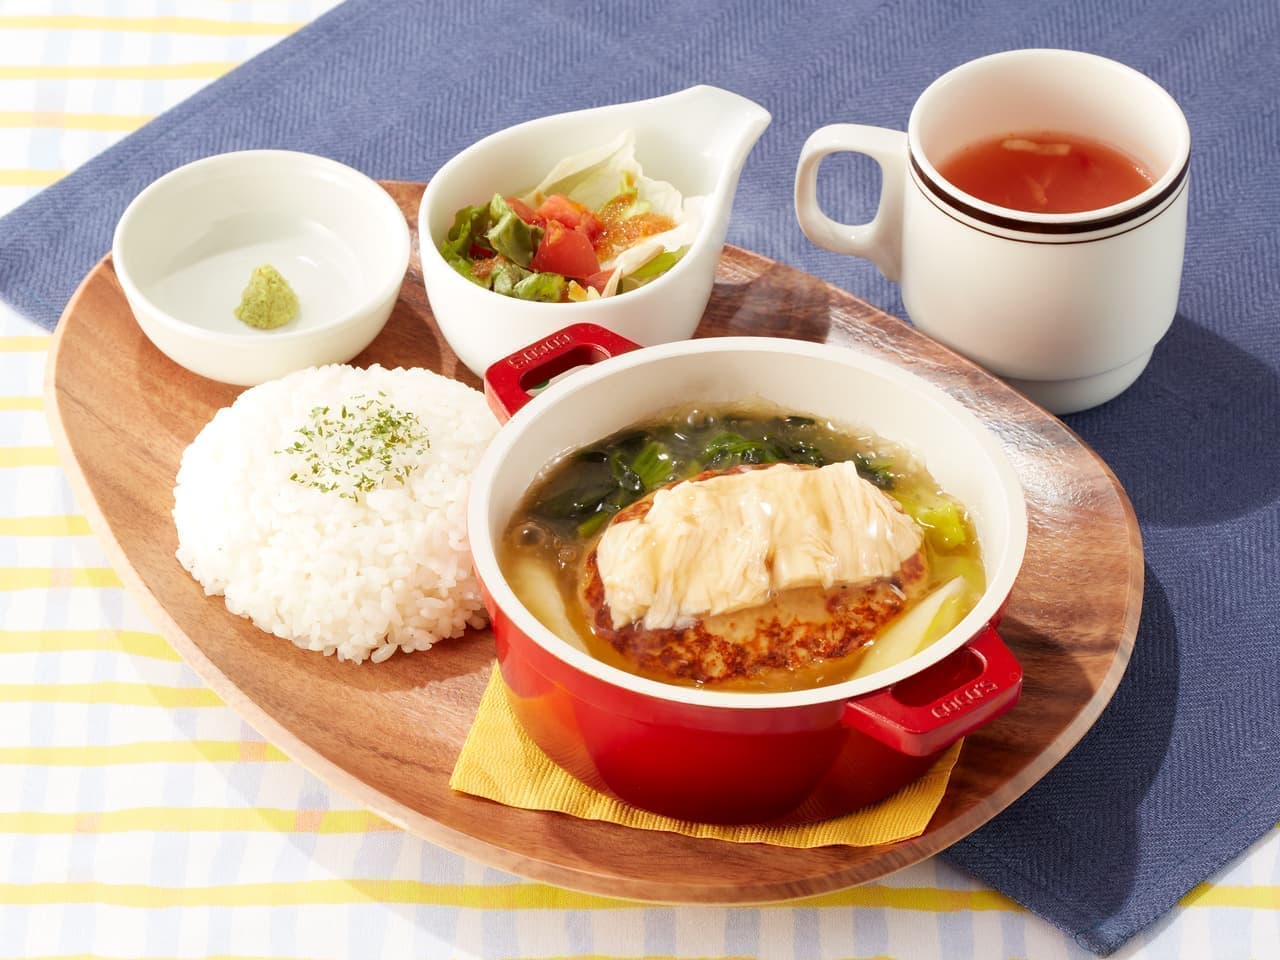 Cocos "Cocotte hamburger lunch with hand-rolled fresh yuba and Kyoto-style red bean paste